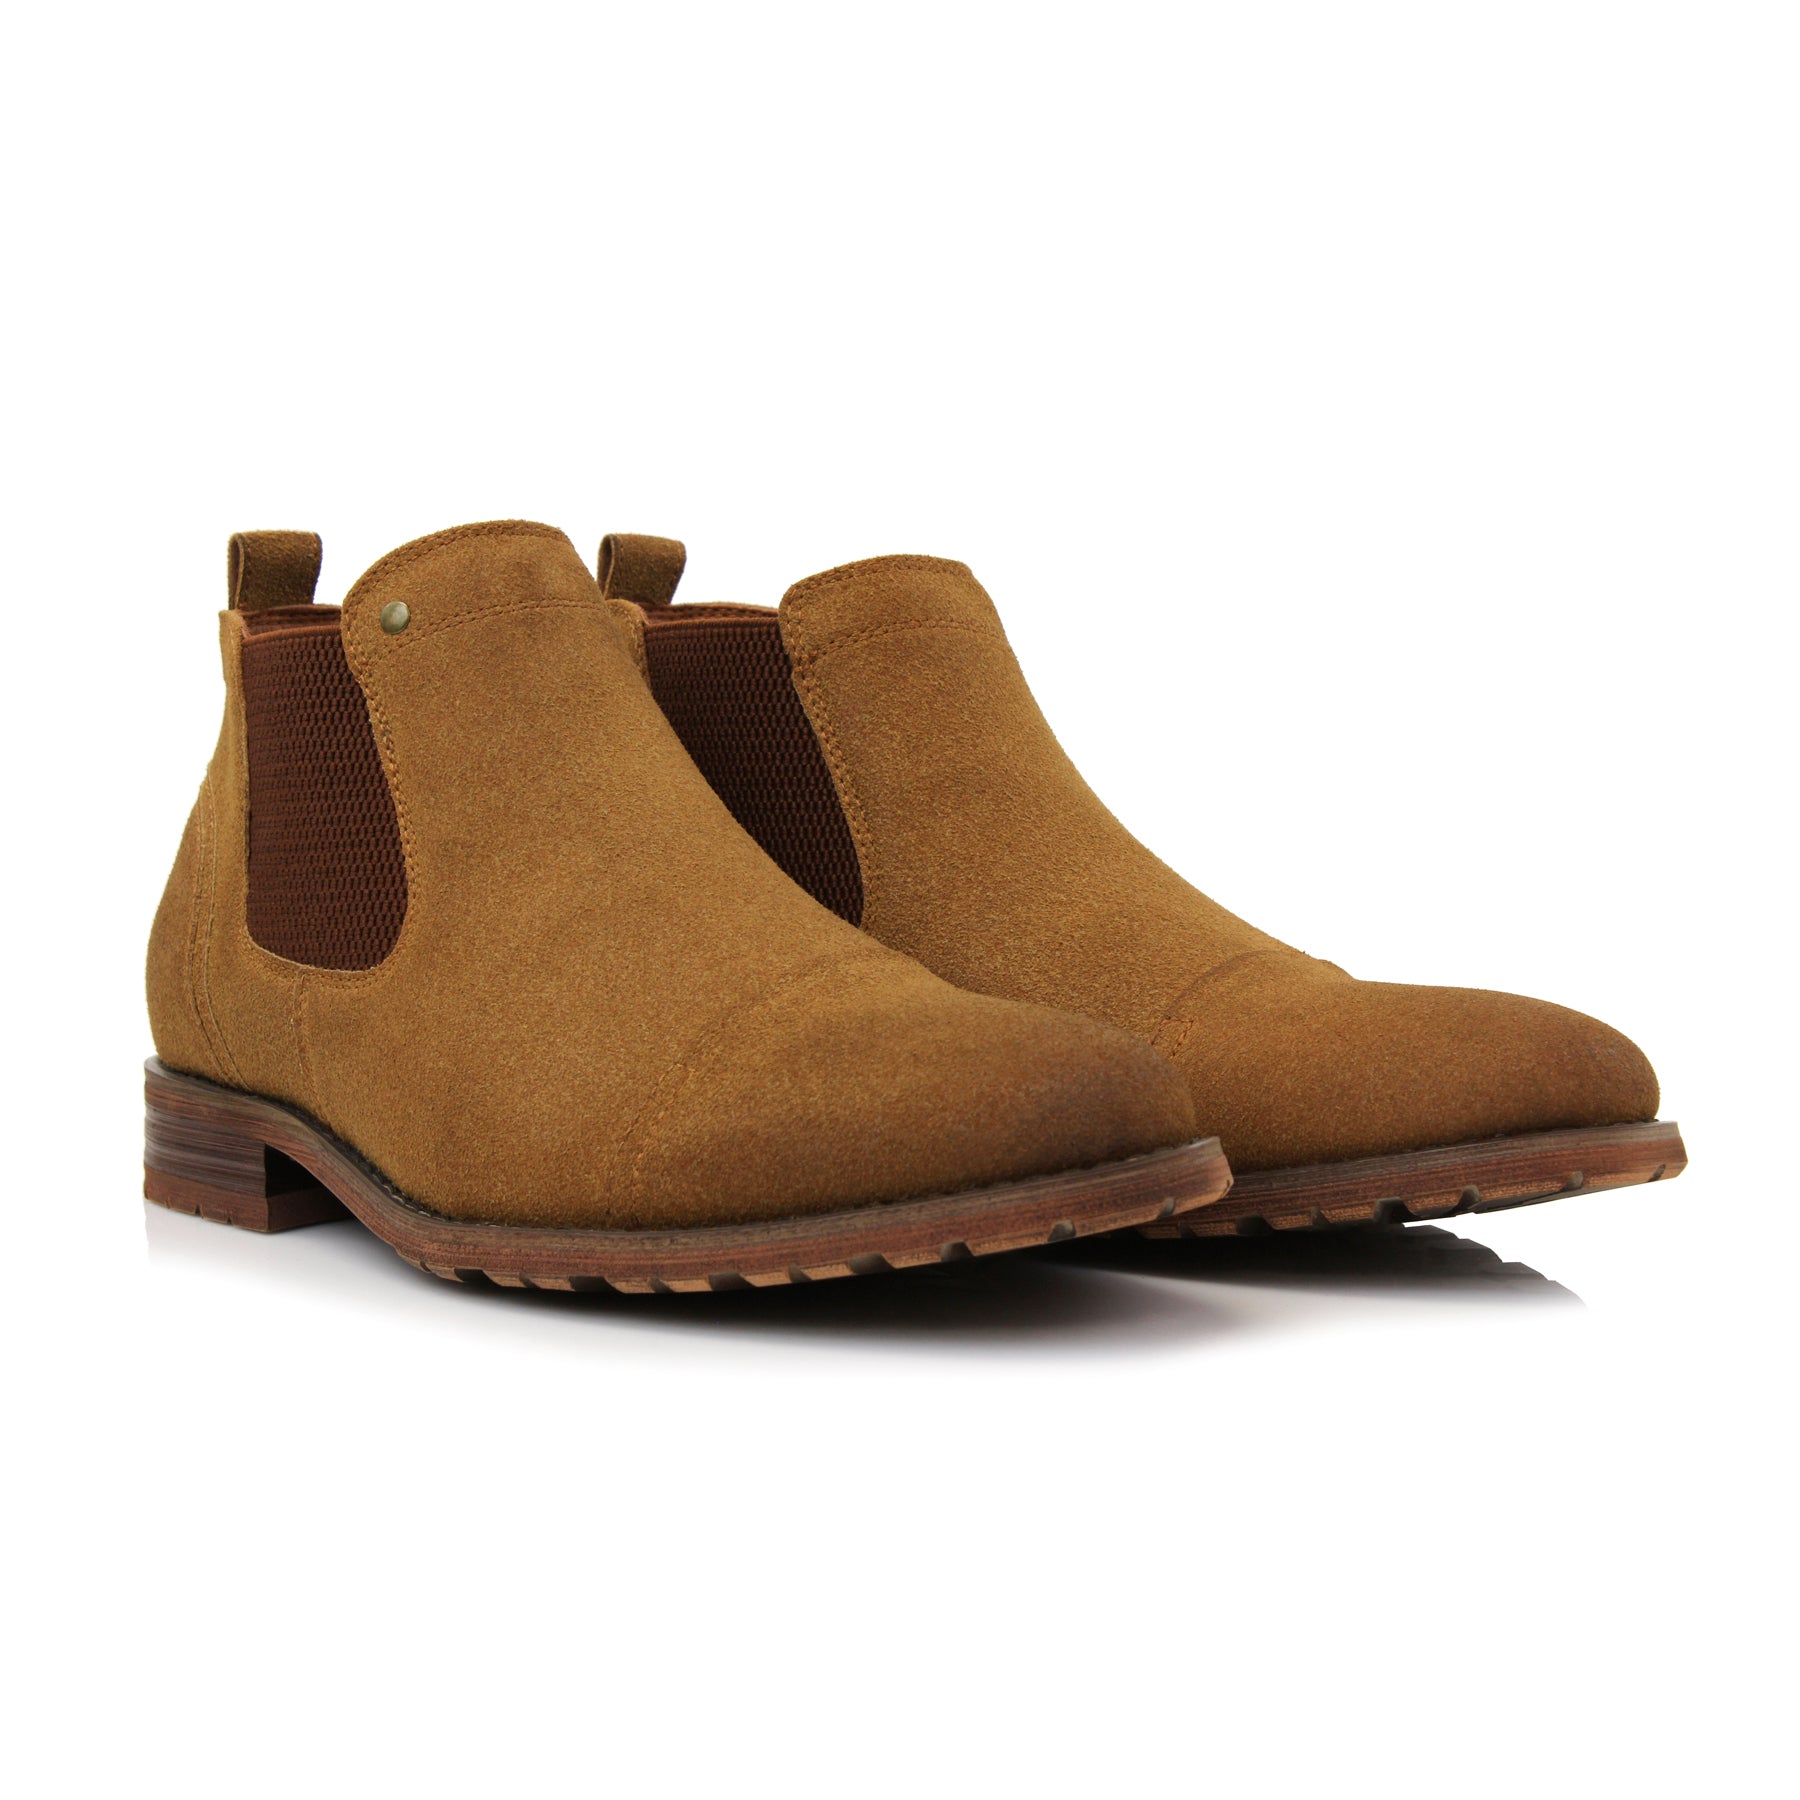 Suede Chelsea Boots | Sterling by Ferro Aldo | Conal Footwear | Paired Angle View